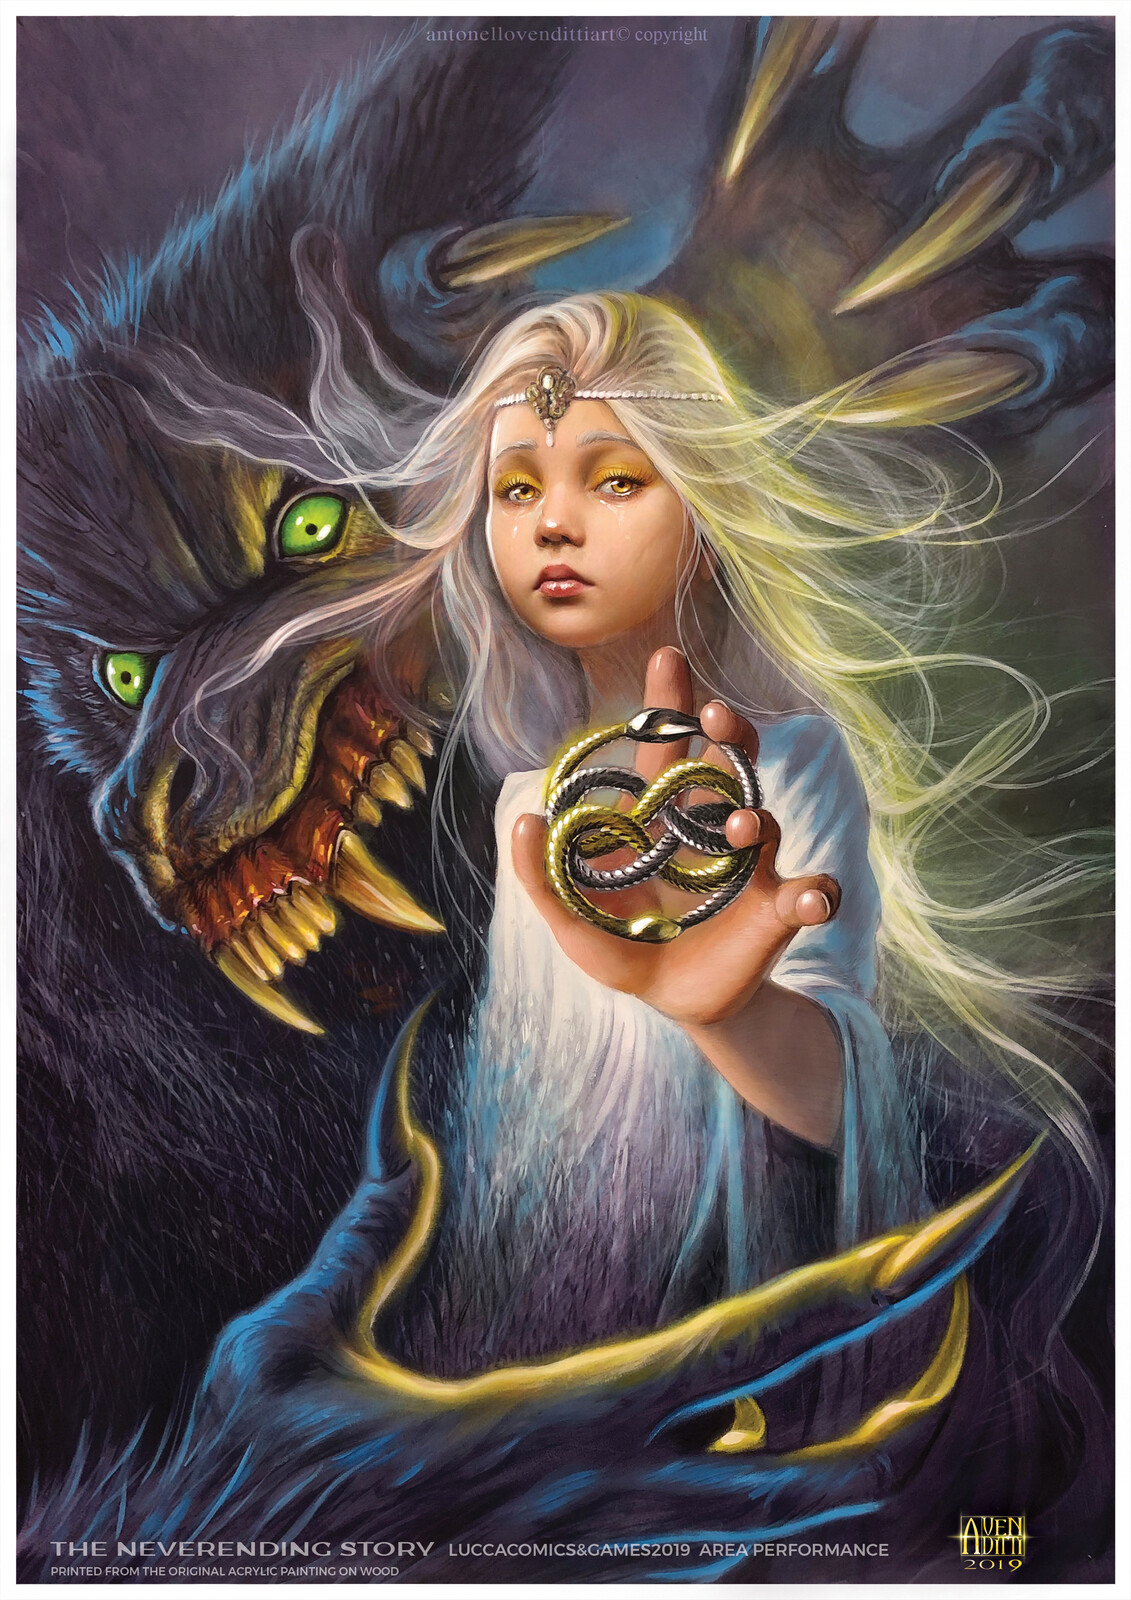 GMORK And Childlike Empress (the neverending story).


acrylic painting on wood made at Luccacomics &amp; games 2019 for the 40th anniversary of the release of the book THE NEVERENDING STORY